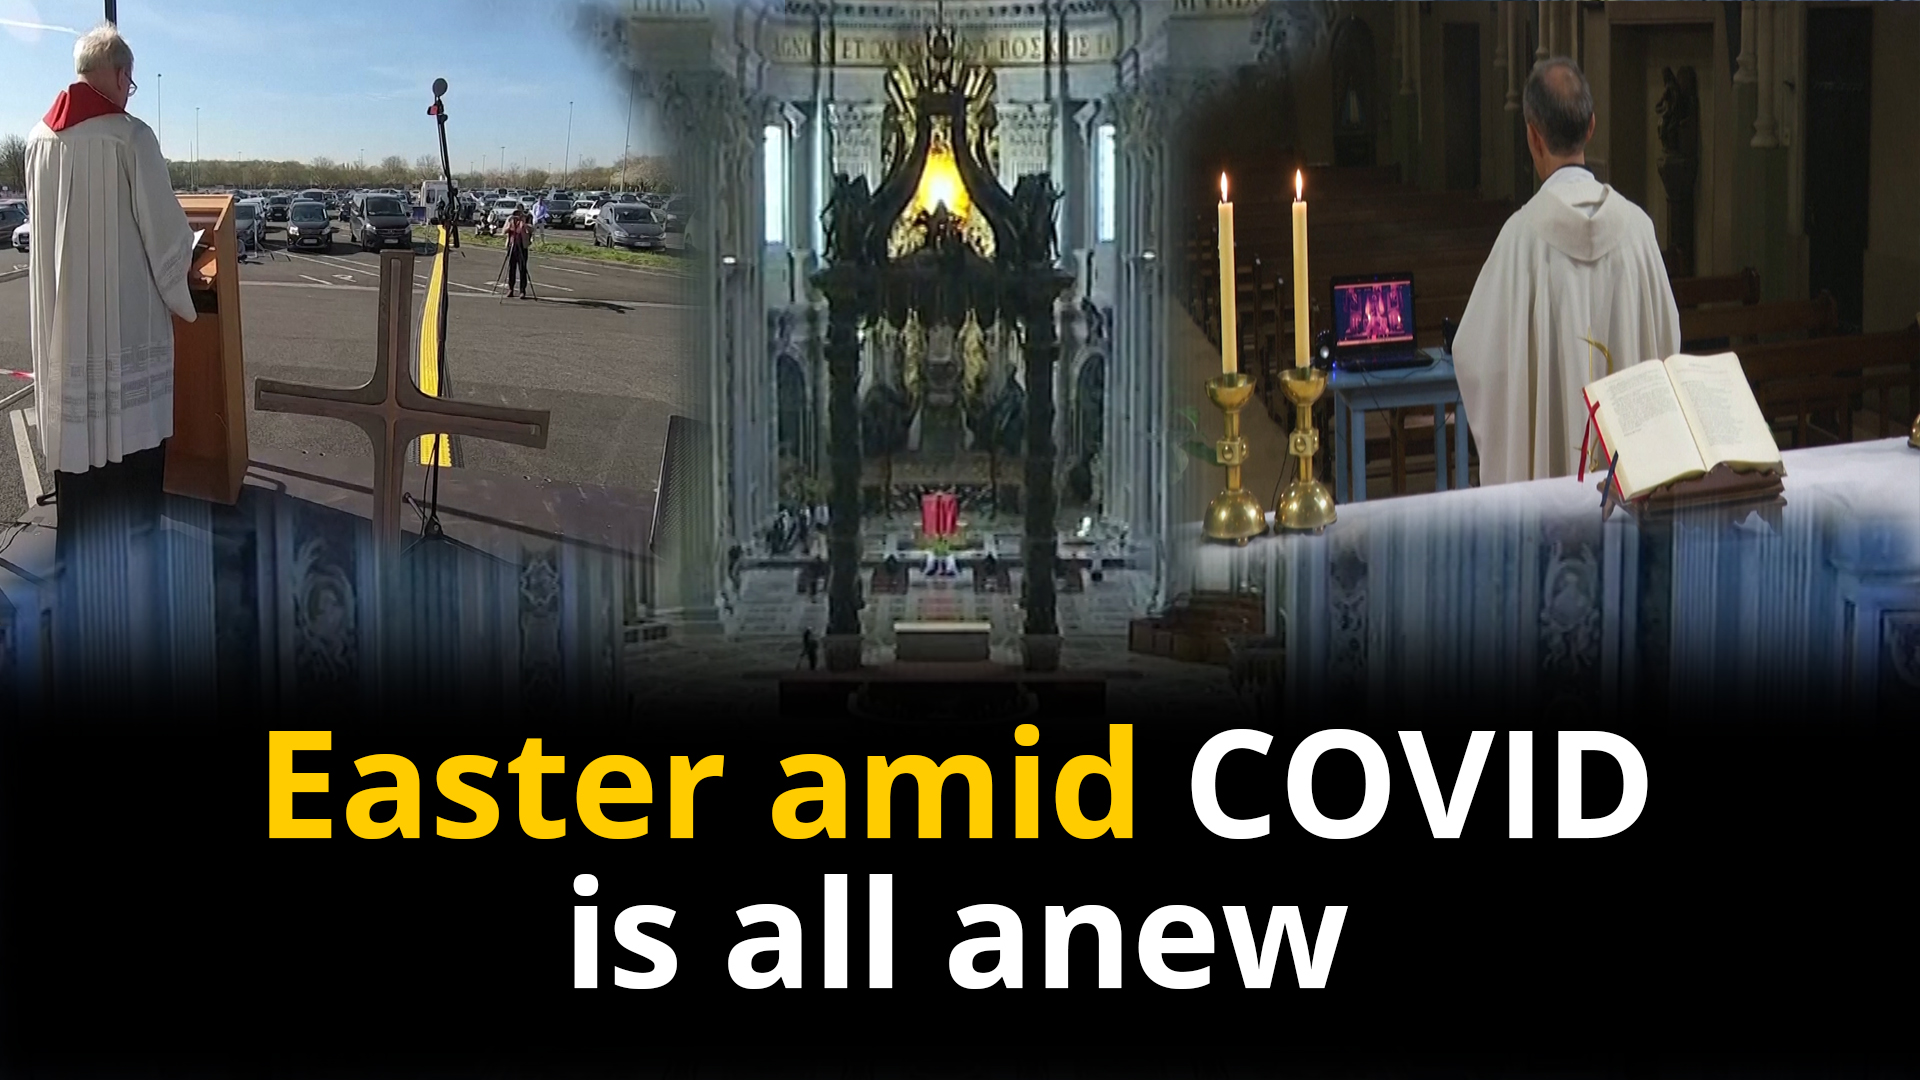 Drive-in mass to chopper blessings: Easter celebrations amid COVID is all anew